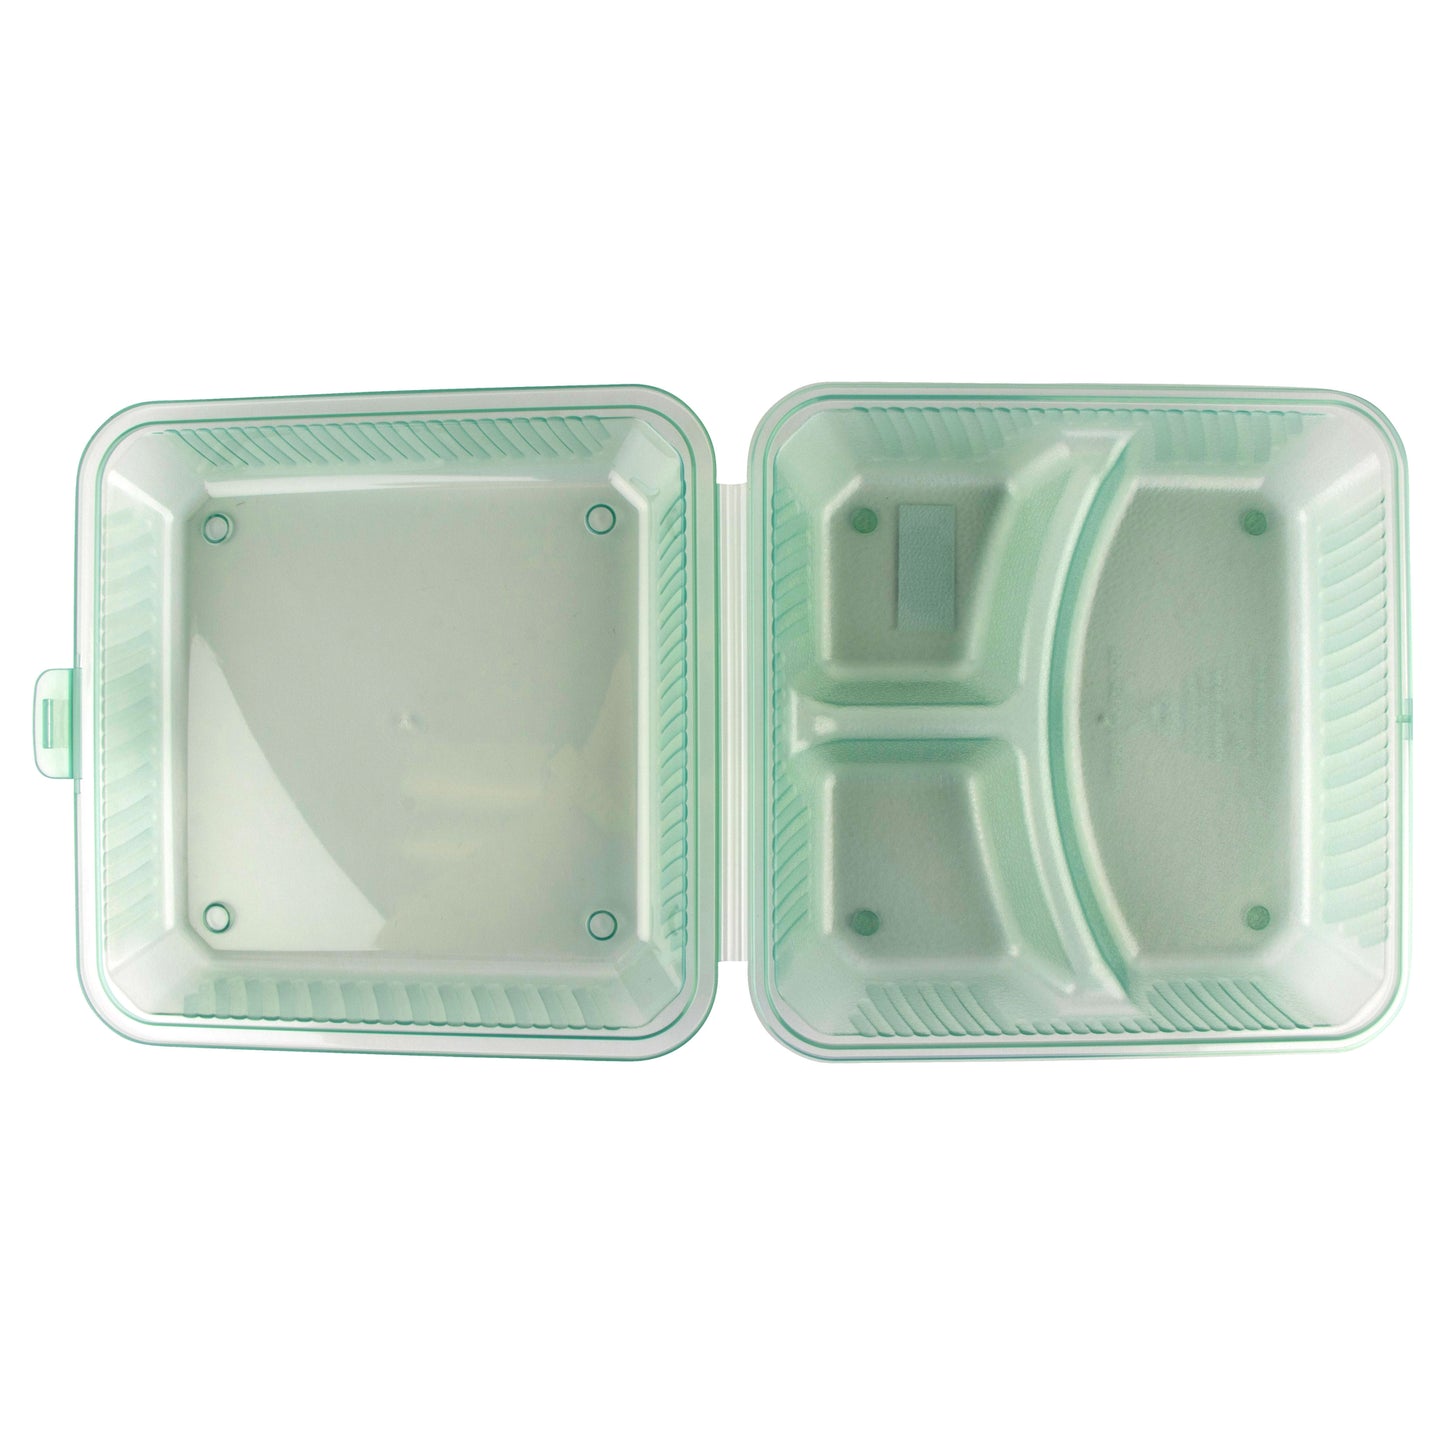 3-Compartmant Polypropylene, Jade, Food Reusable Container, 9" L x 9" W x 2.5" H, G.E.T. Eco-Takeout's (12 Pack)